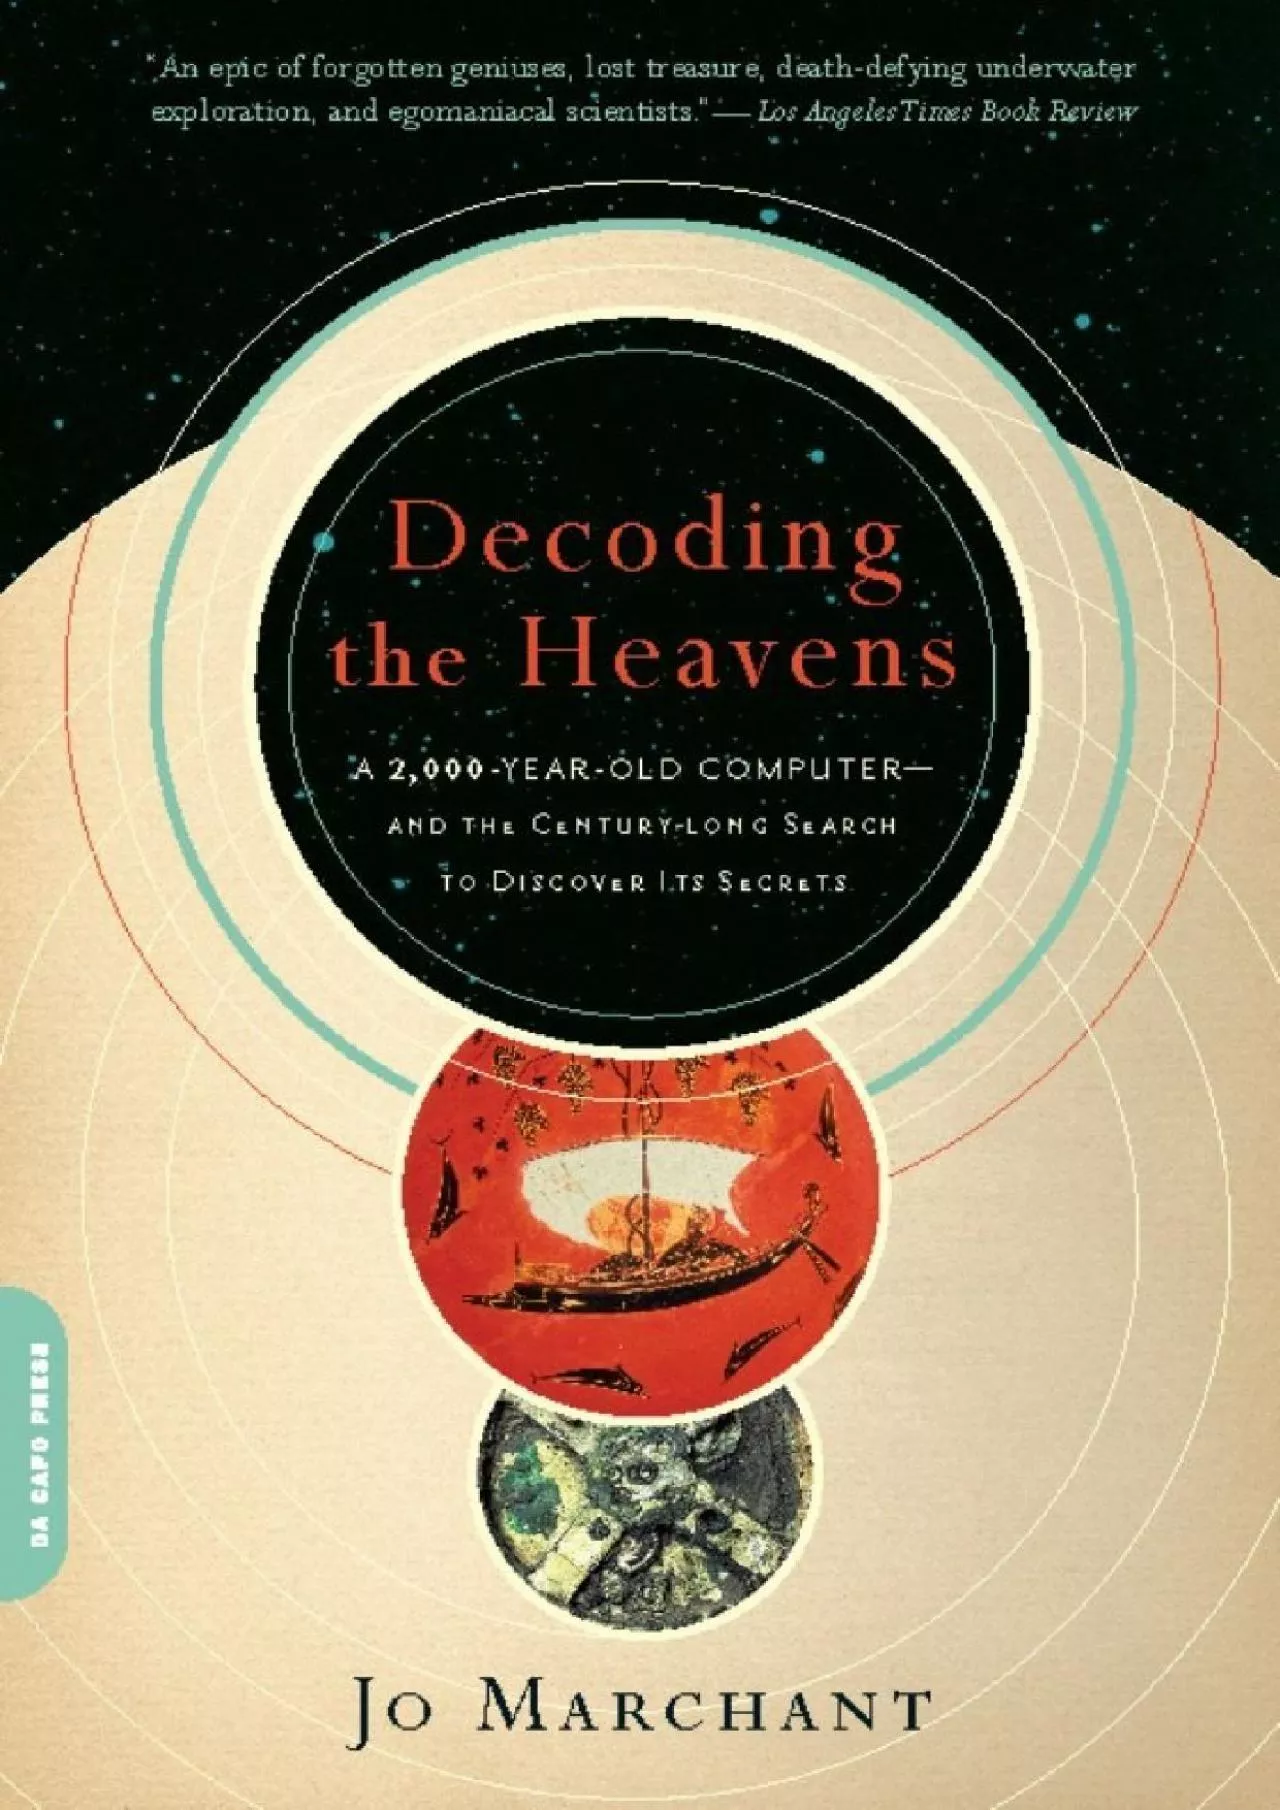 (EBOOK)-Decoding the Heavens: A 2,000-Year-Old Computer -- and the Century-Long Search